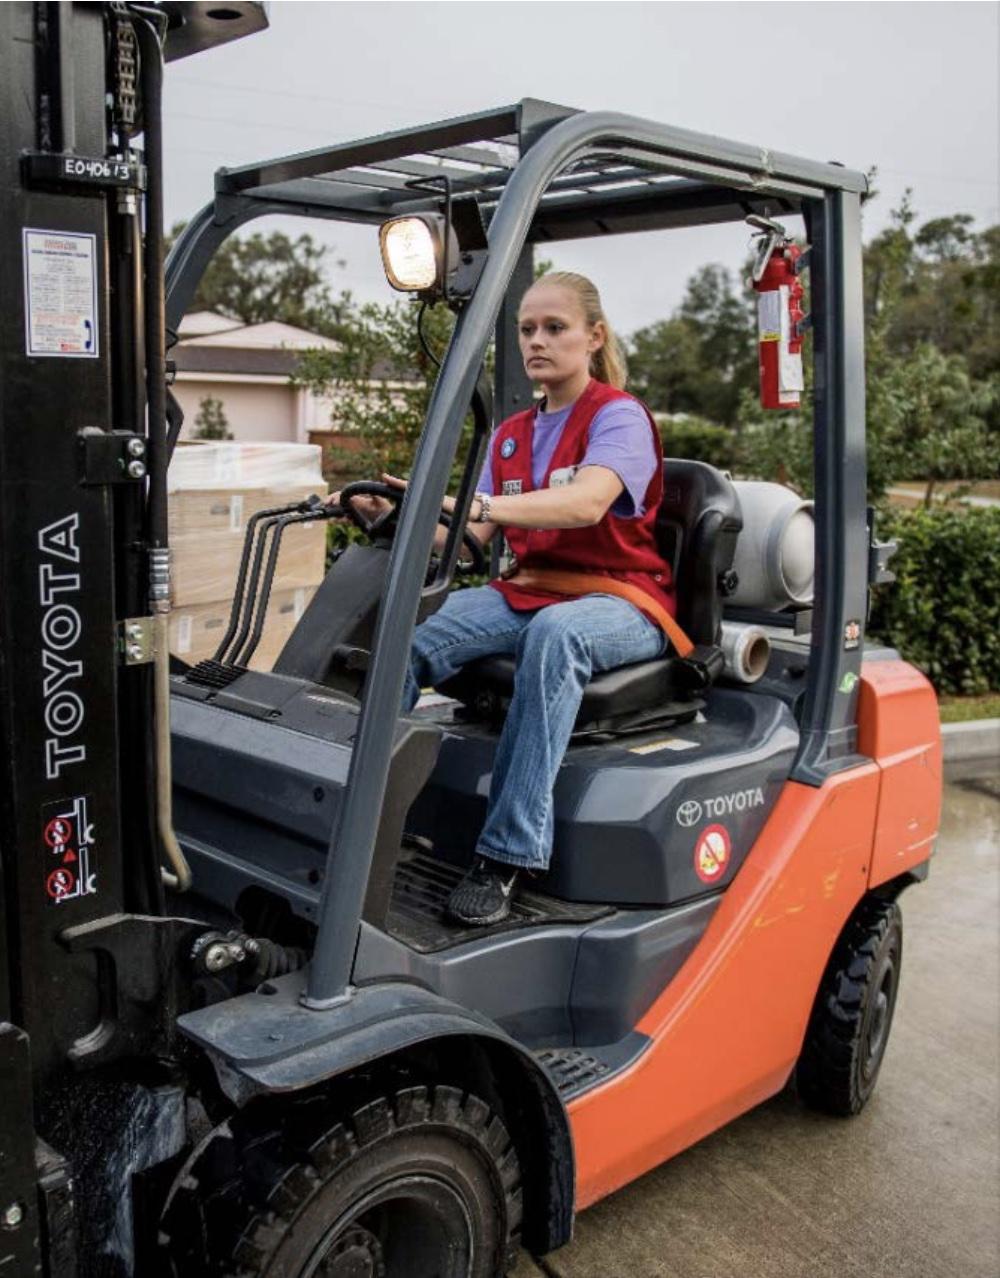 tractor supply employee in a red vest, driving a forklift